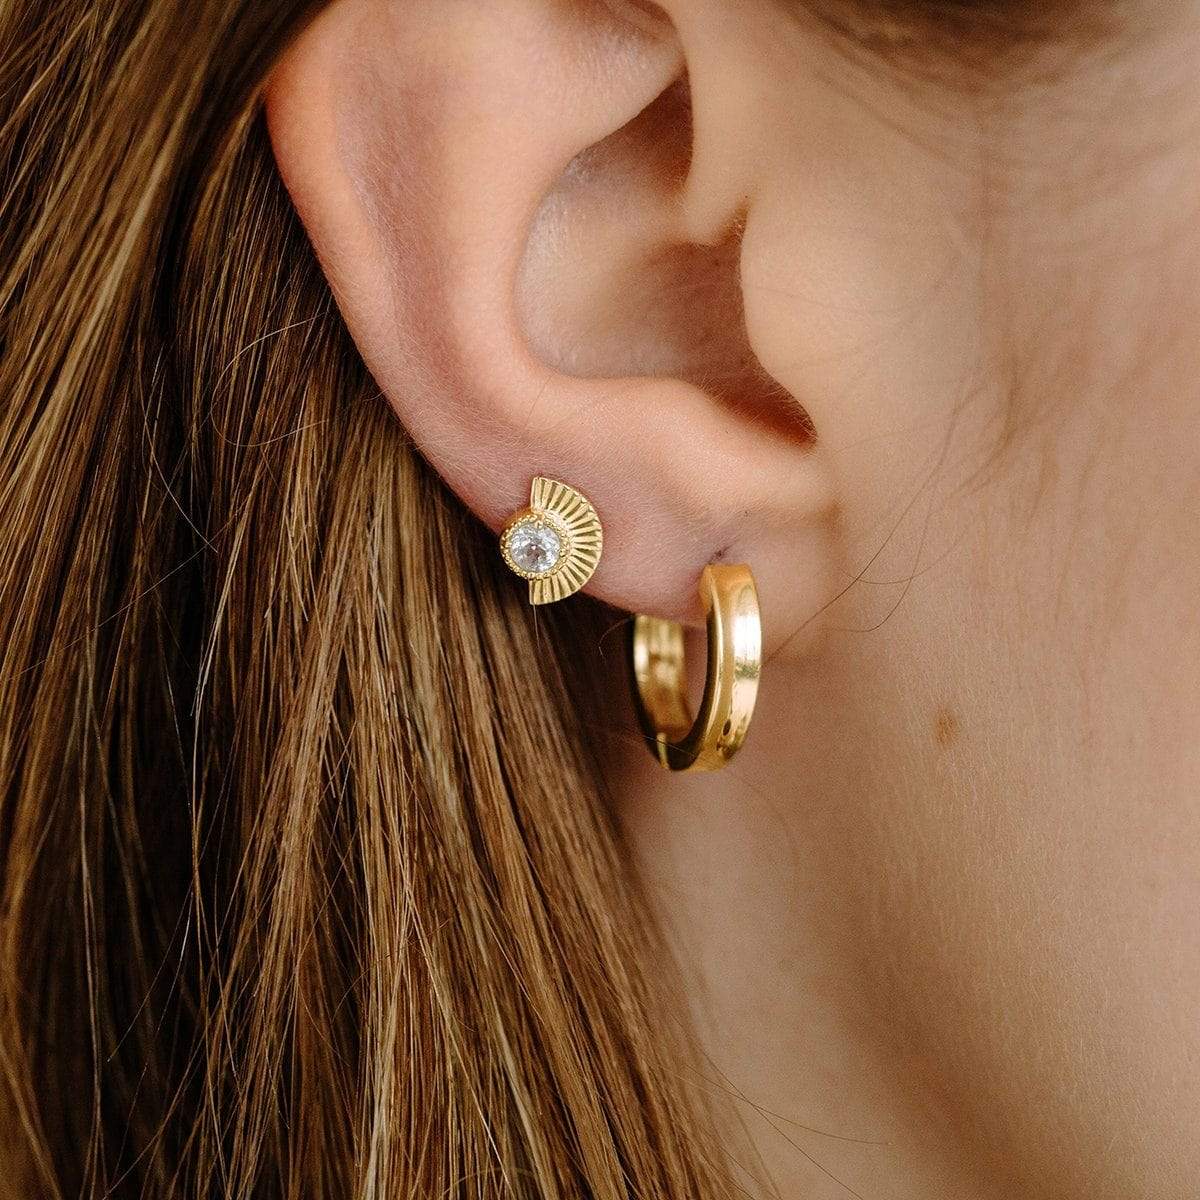 Boma Jewelry Earrings Cosette Studs Gold